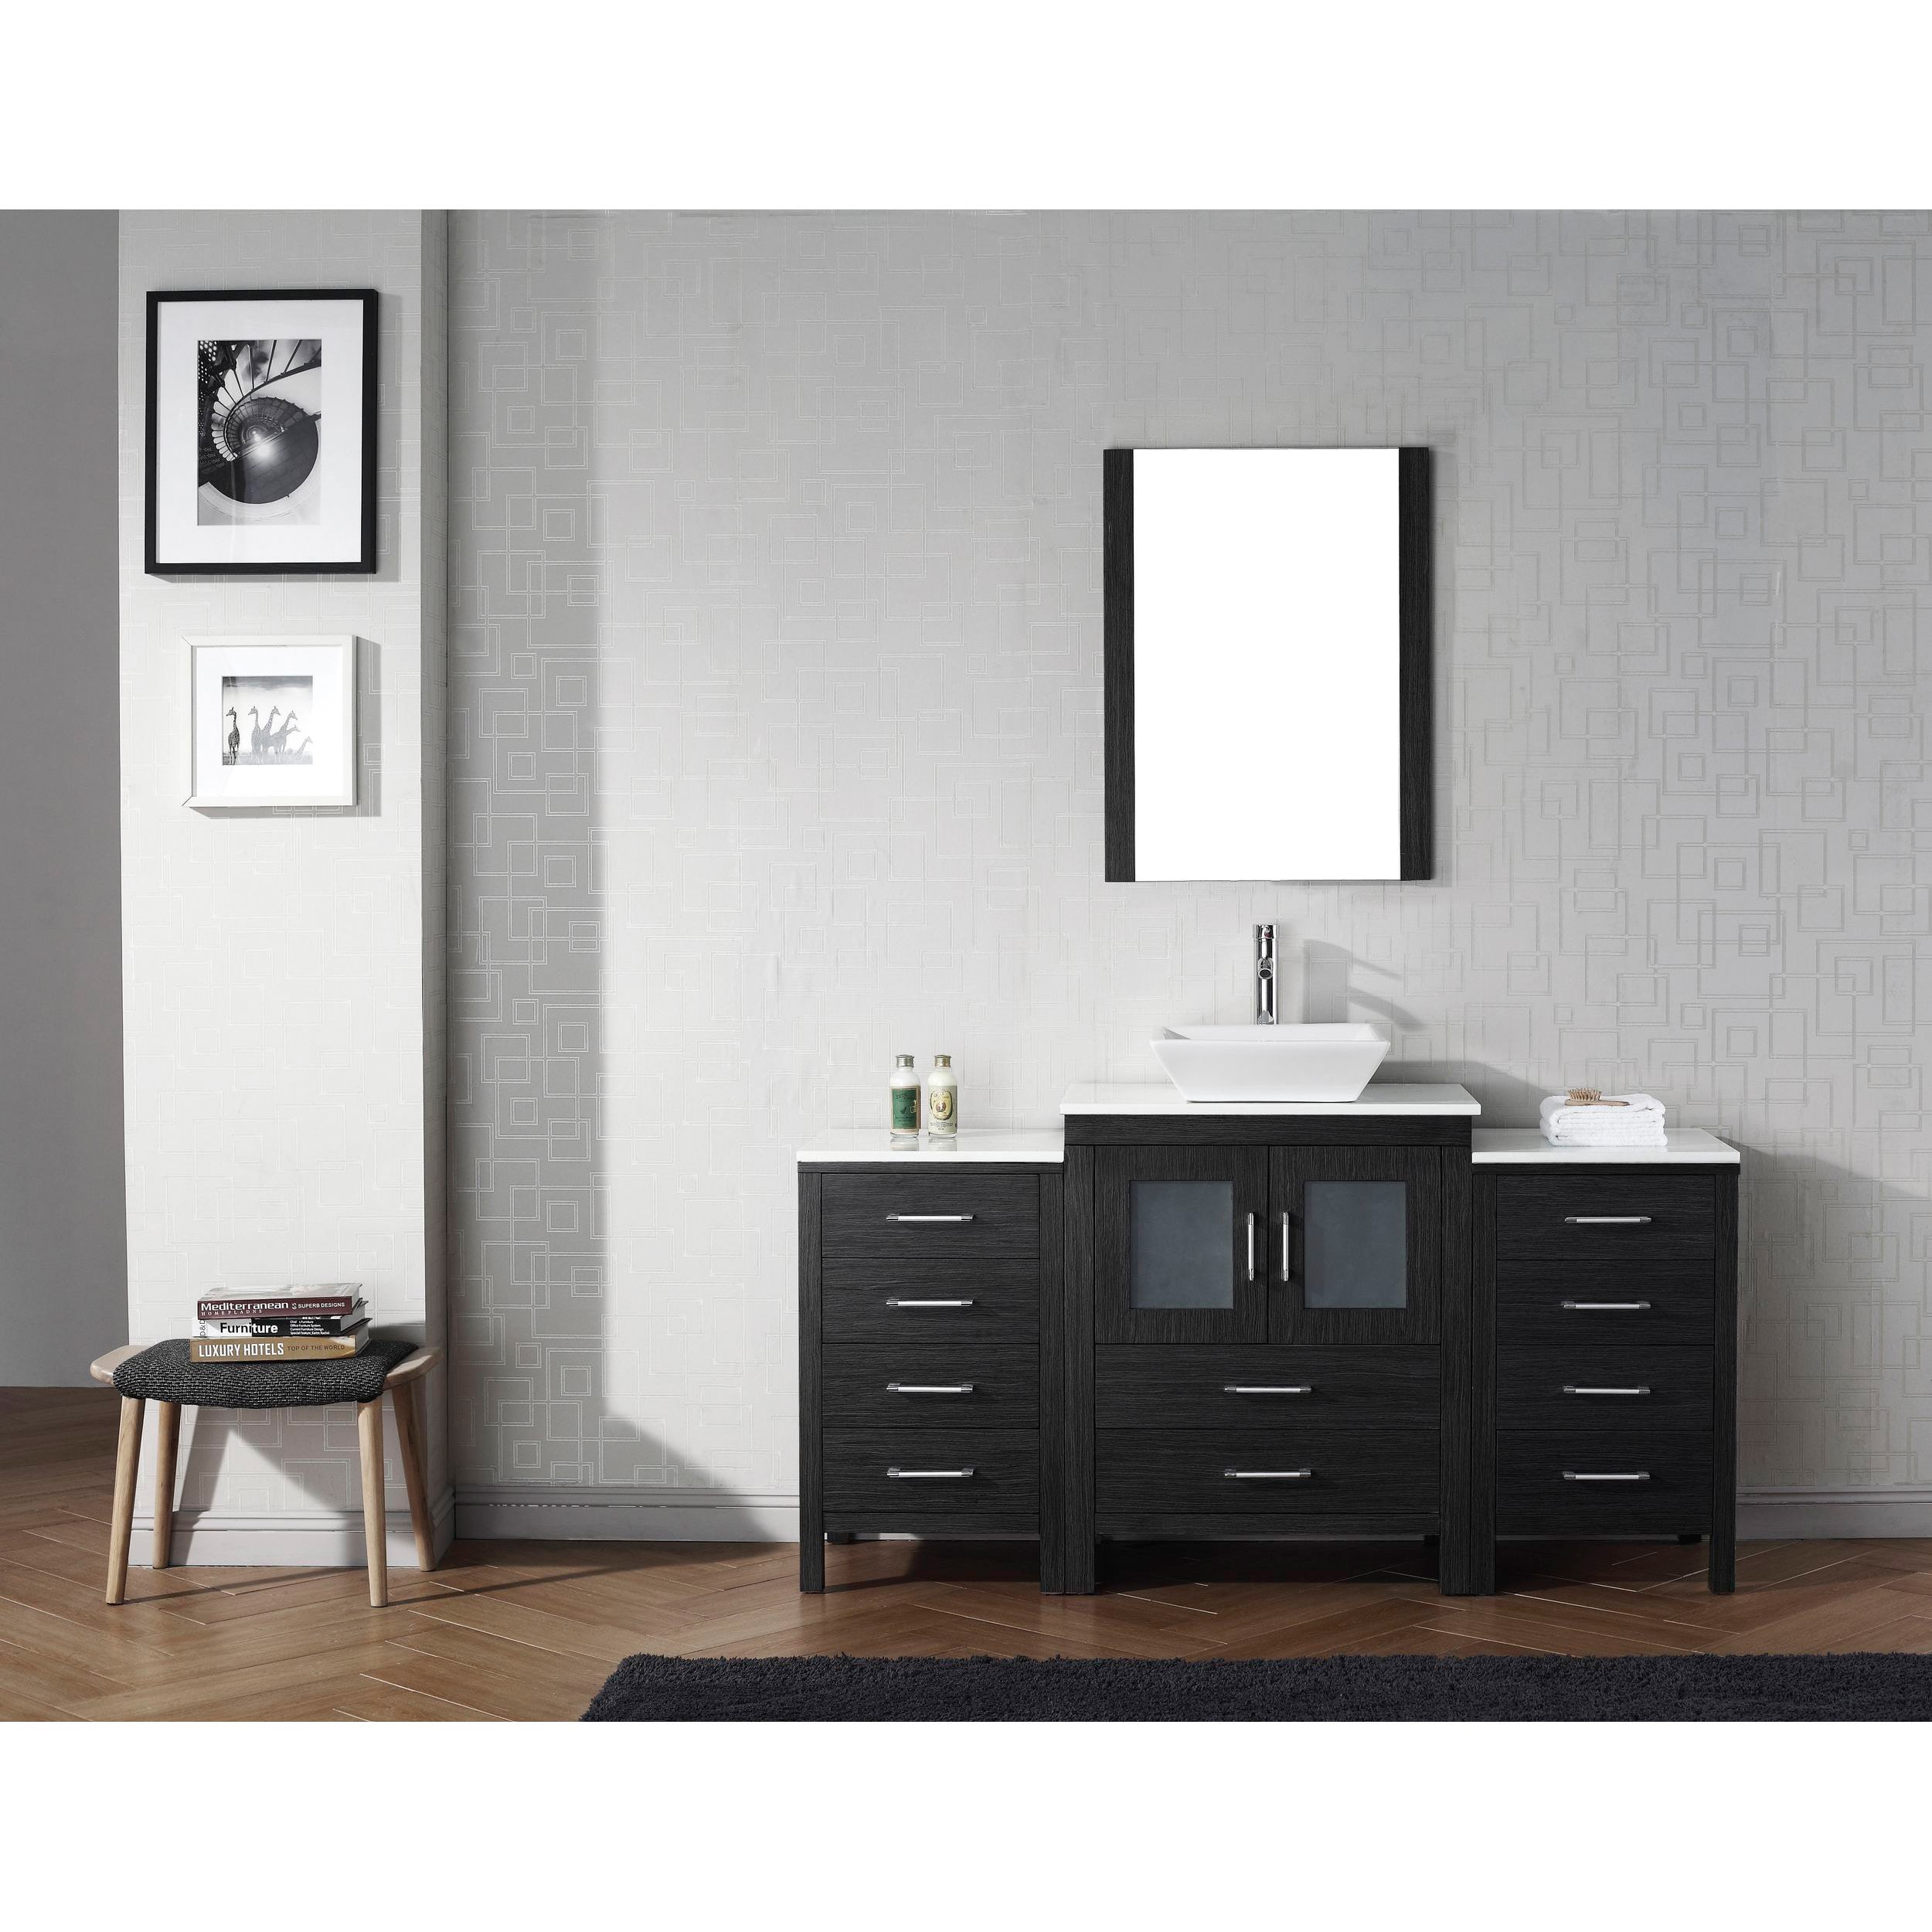 Shop Virtu Usa Dior 64 Inch Stone Top Single Bathroom Vanity Set With Faucet Free Shipping Today Overstock 11592625